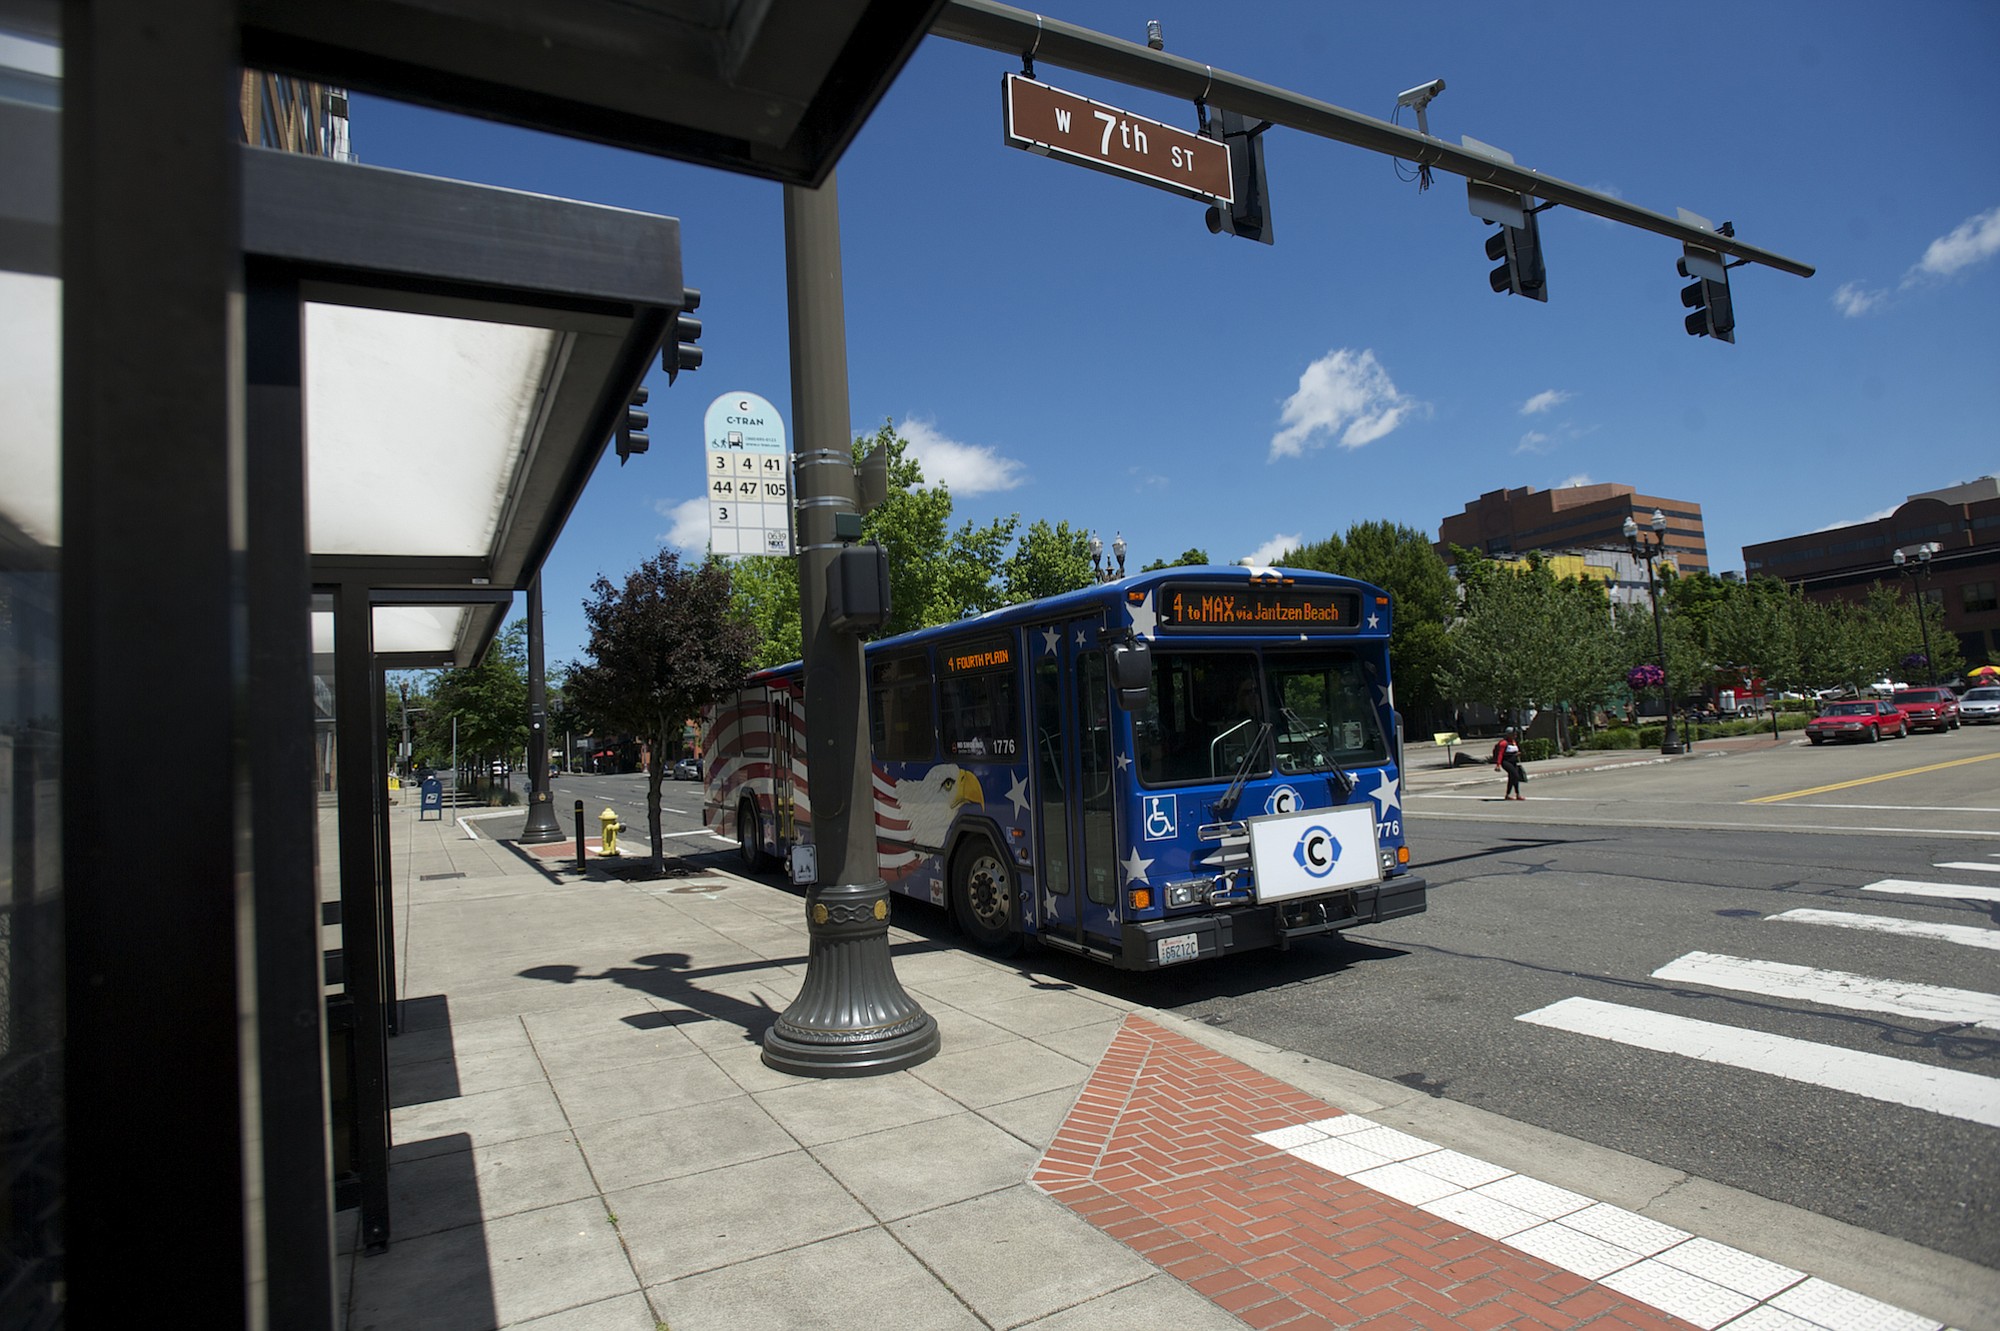 C-Tran, Clark County's transit agency, has asked TriMet, which serves the Oregon side of the metro area, to cancel a deal that would have governed the running of a light-rail system that is not now going to be built.